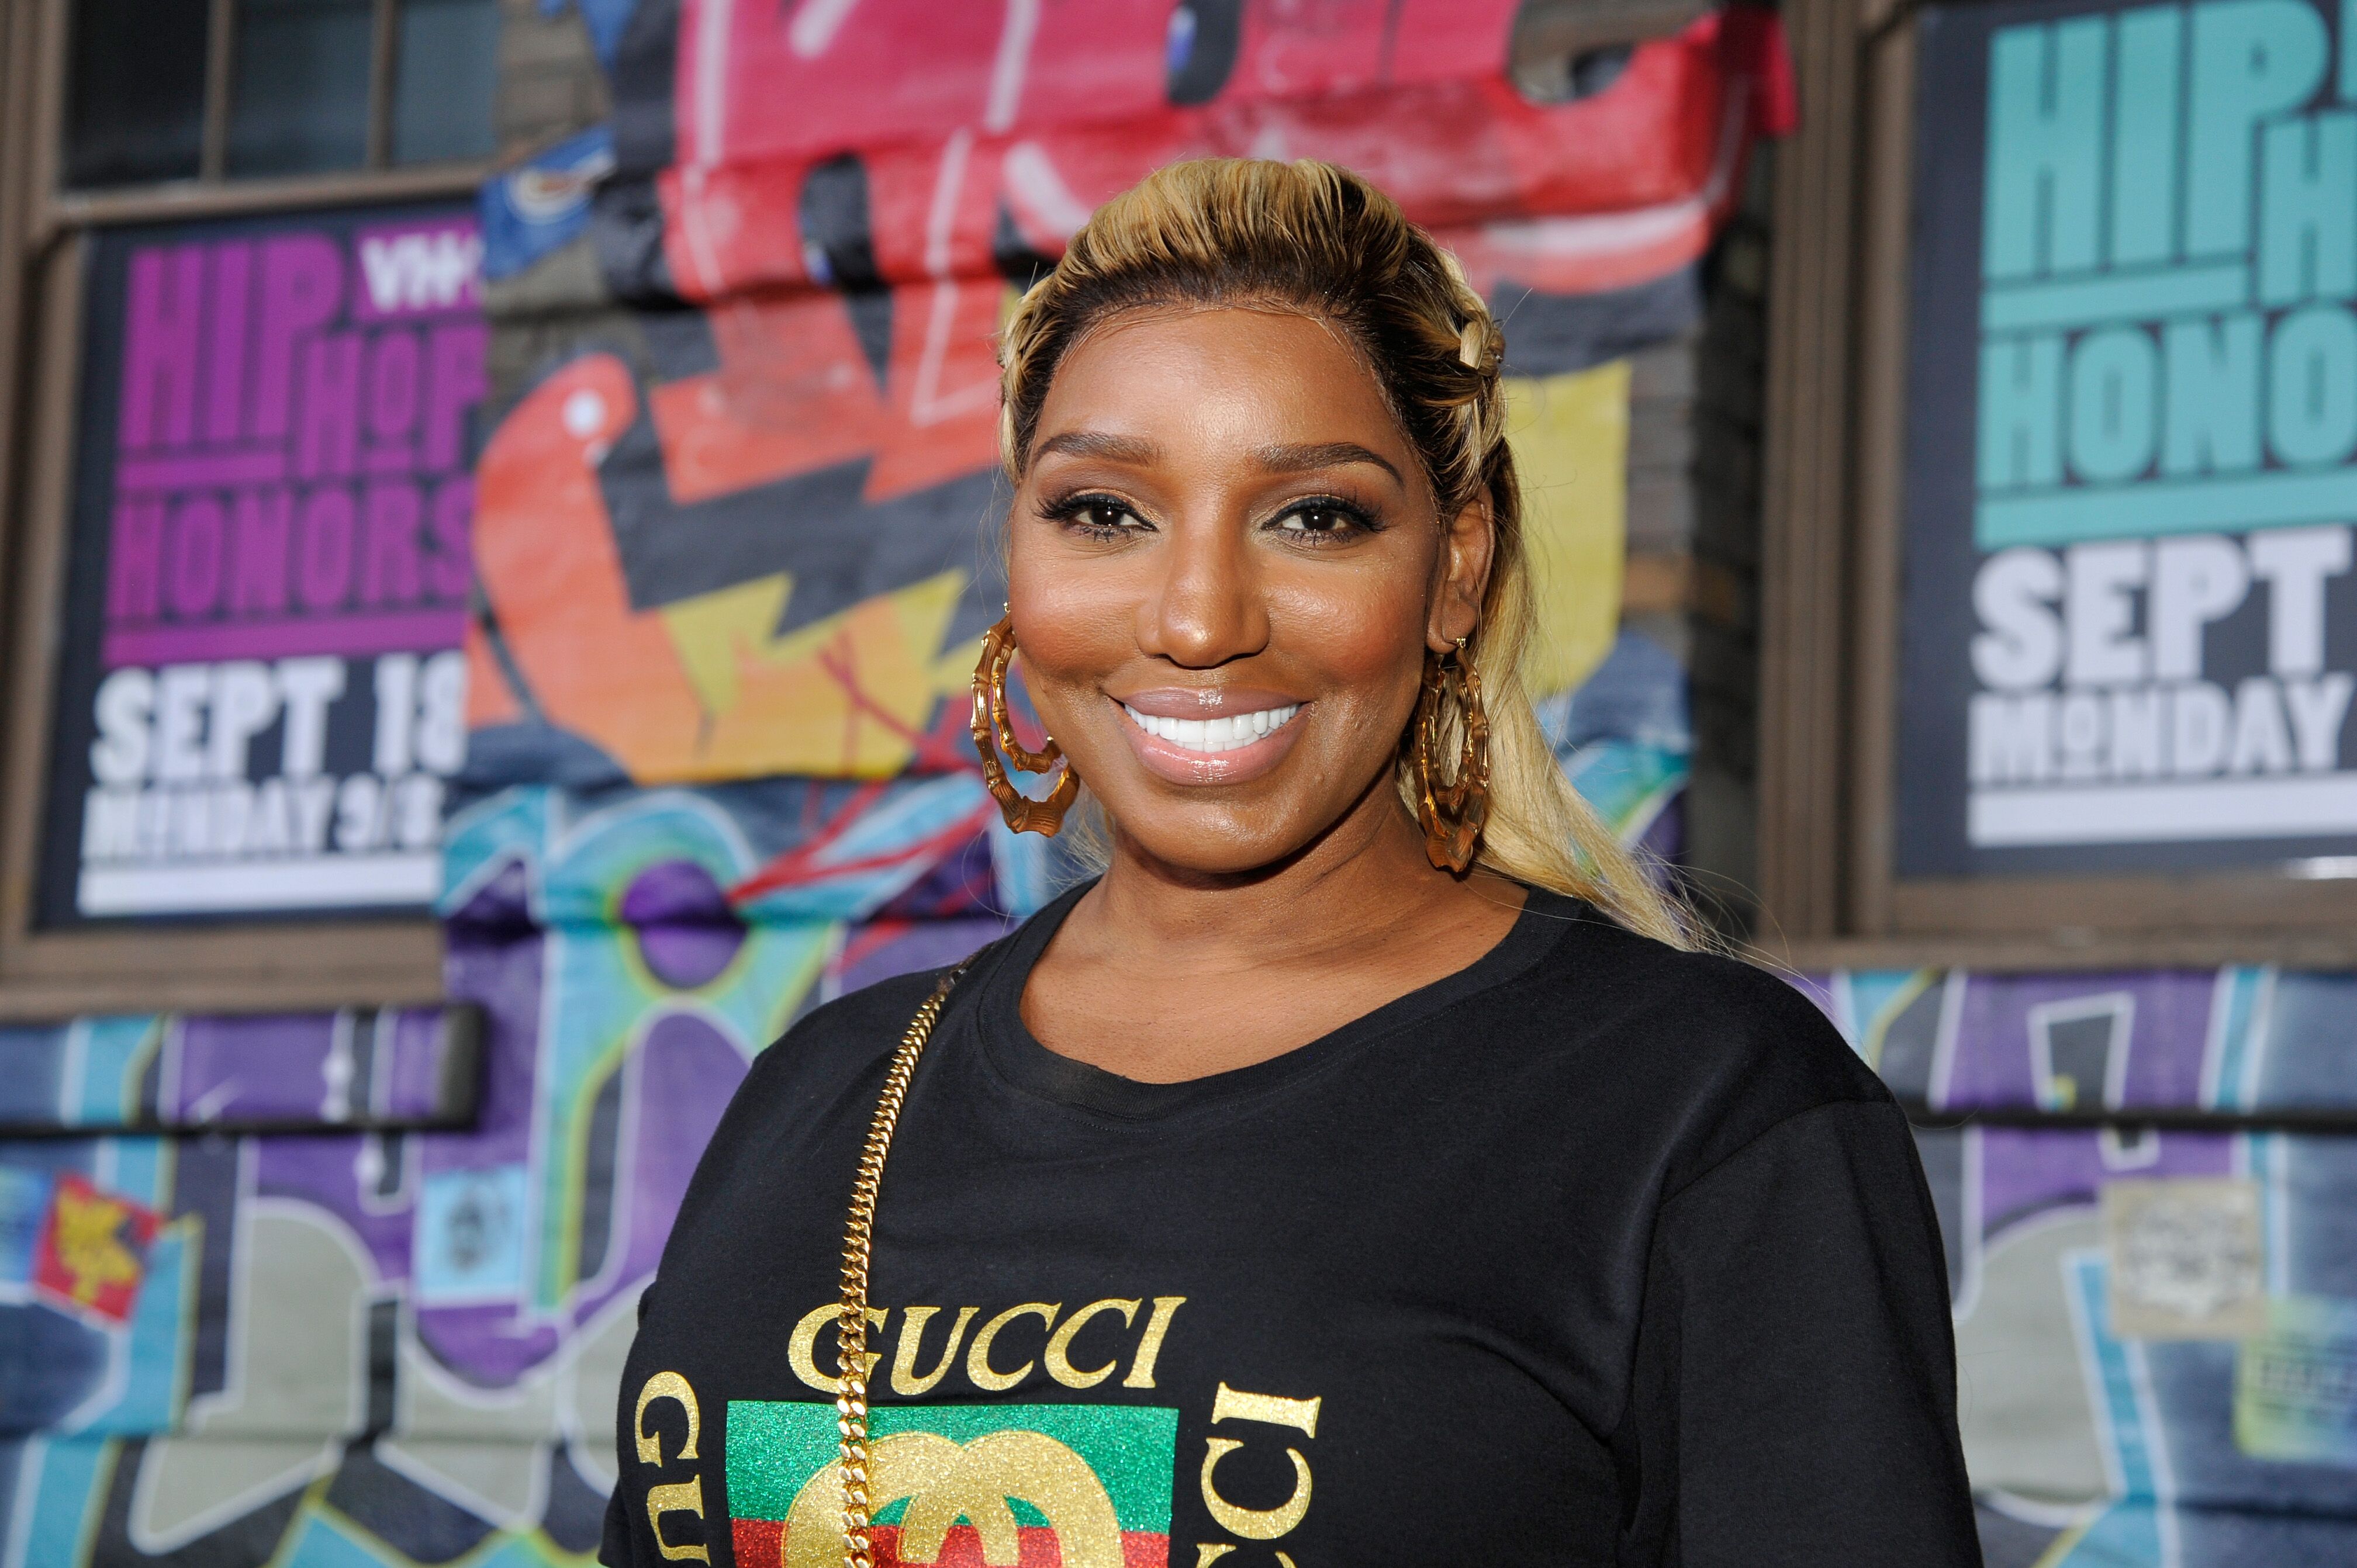 NeNe Leakes at the Hip Hop Honors Awards in Los Angeles/ Source: Getty Images